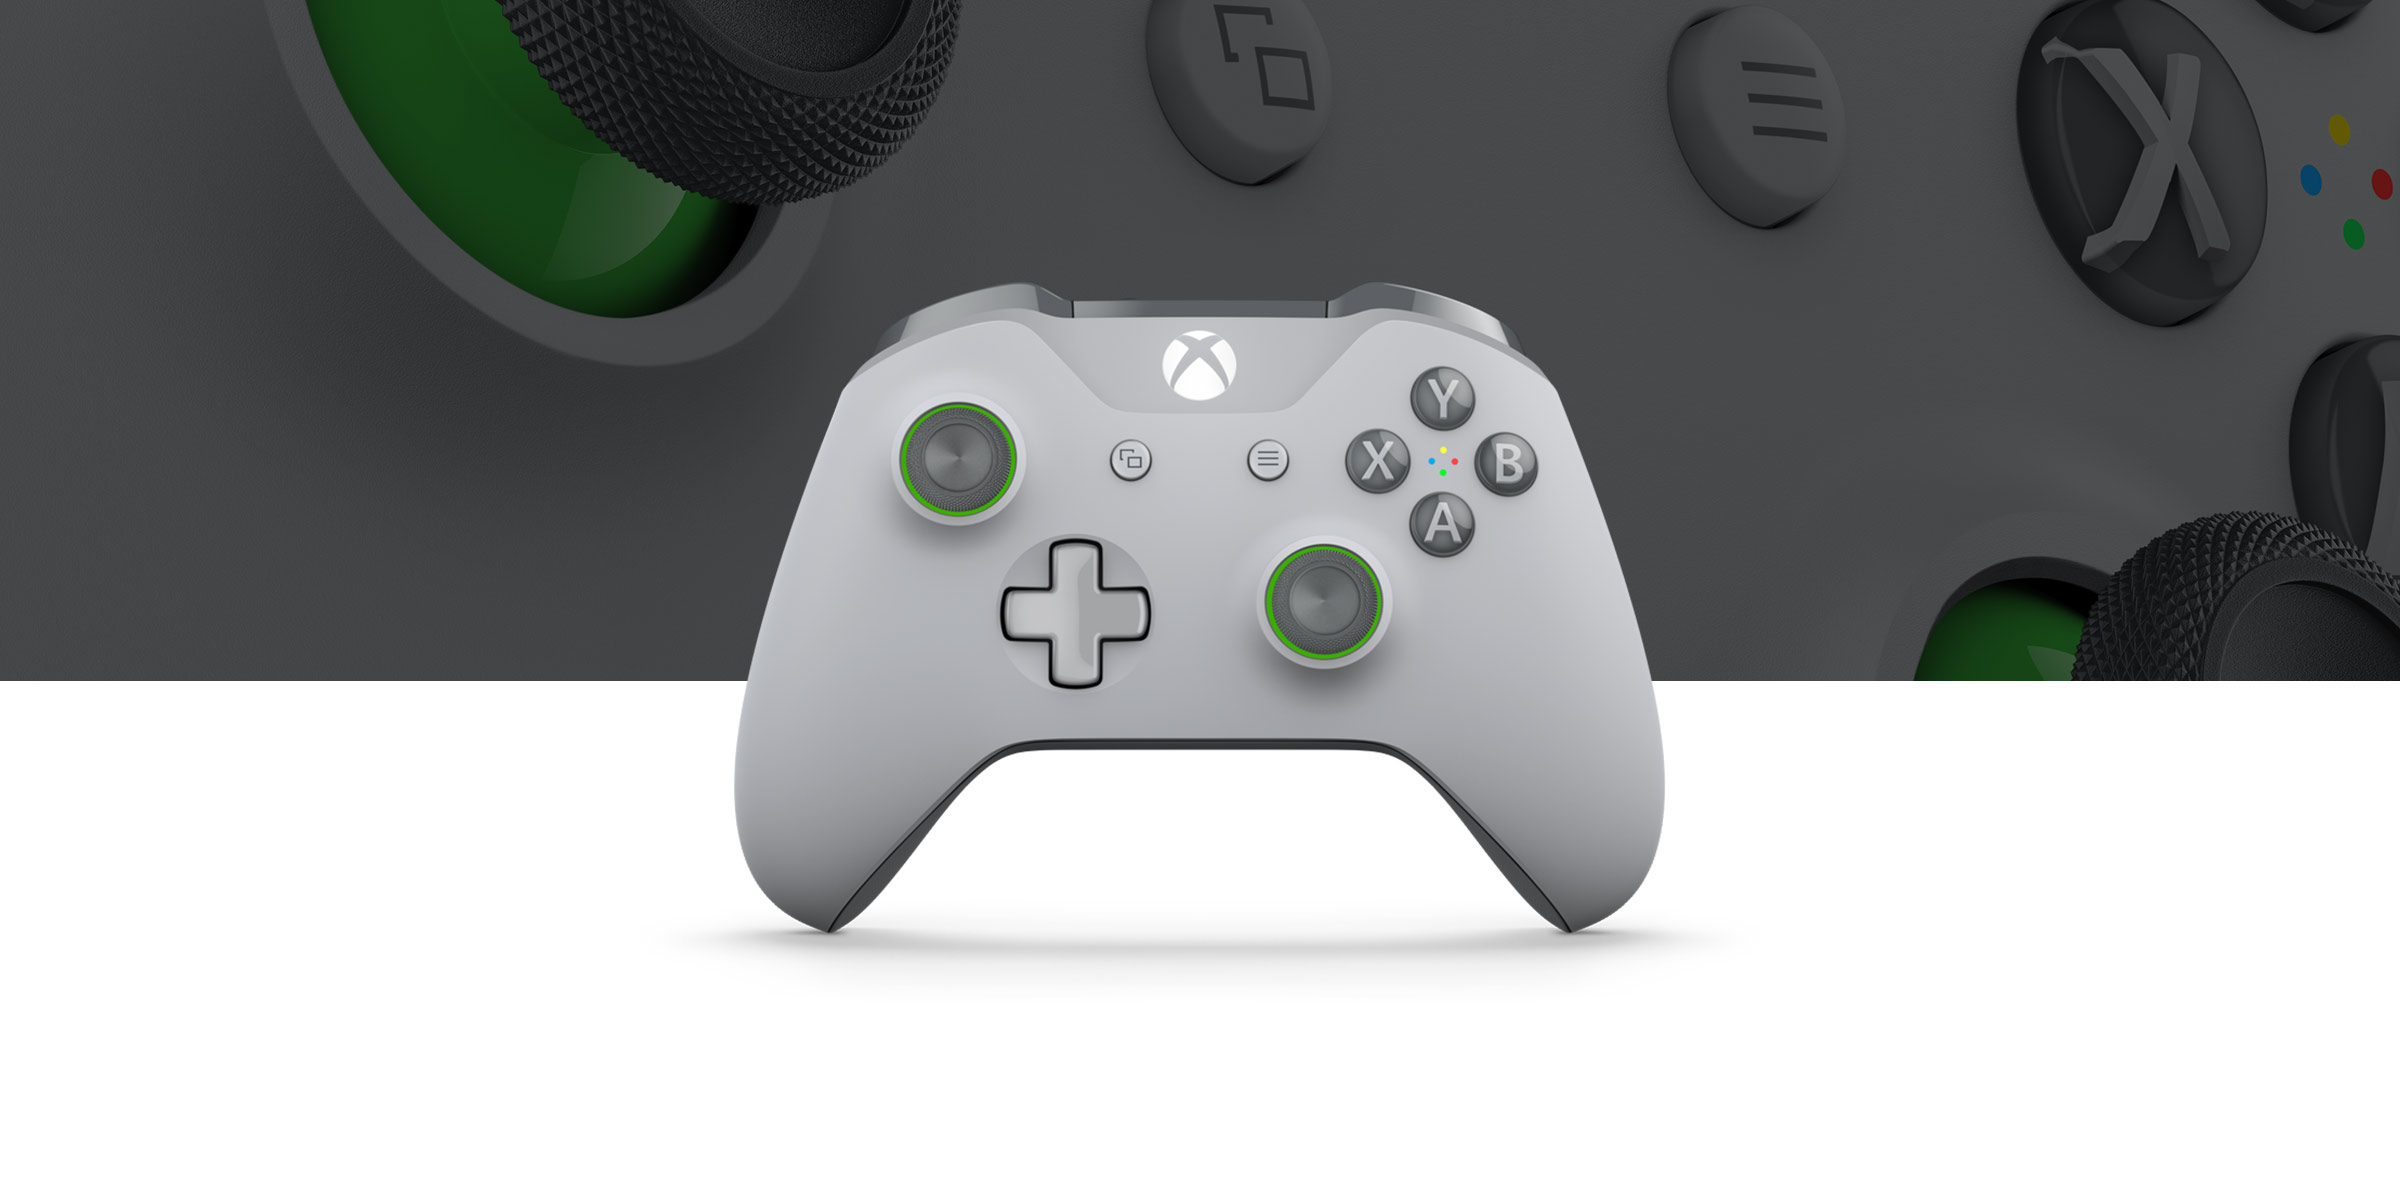 green wireless xbox one controller